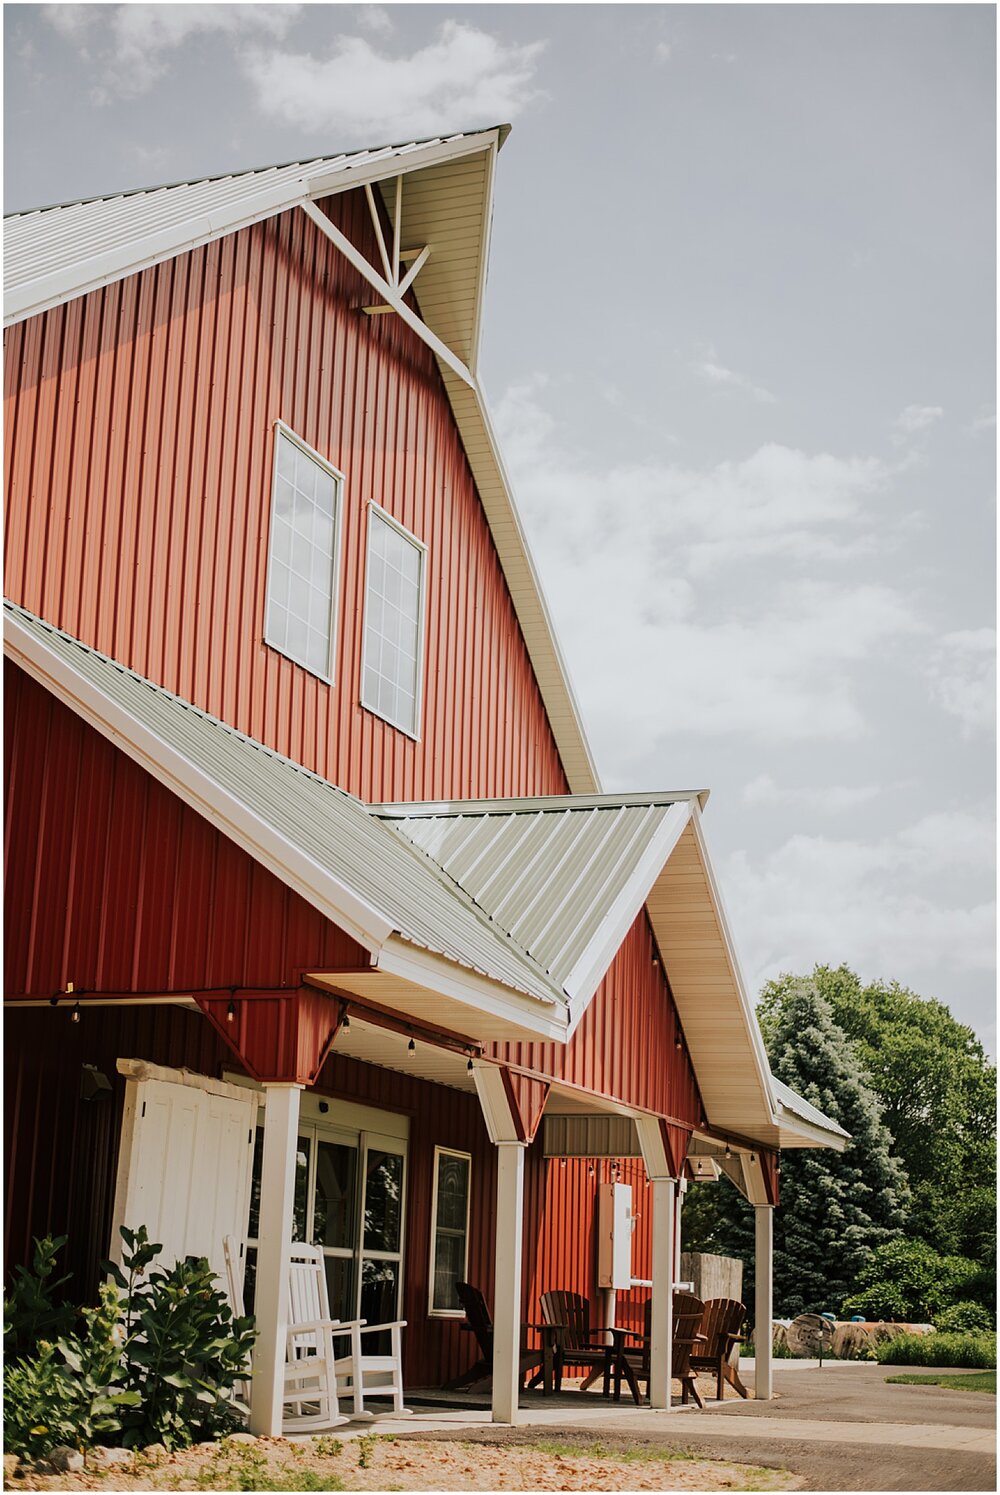  Minnesota wedding venue called The Outpost Center 